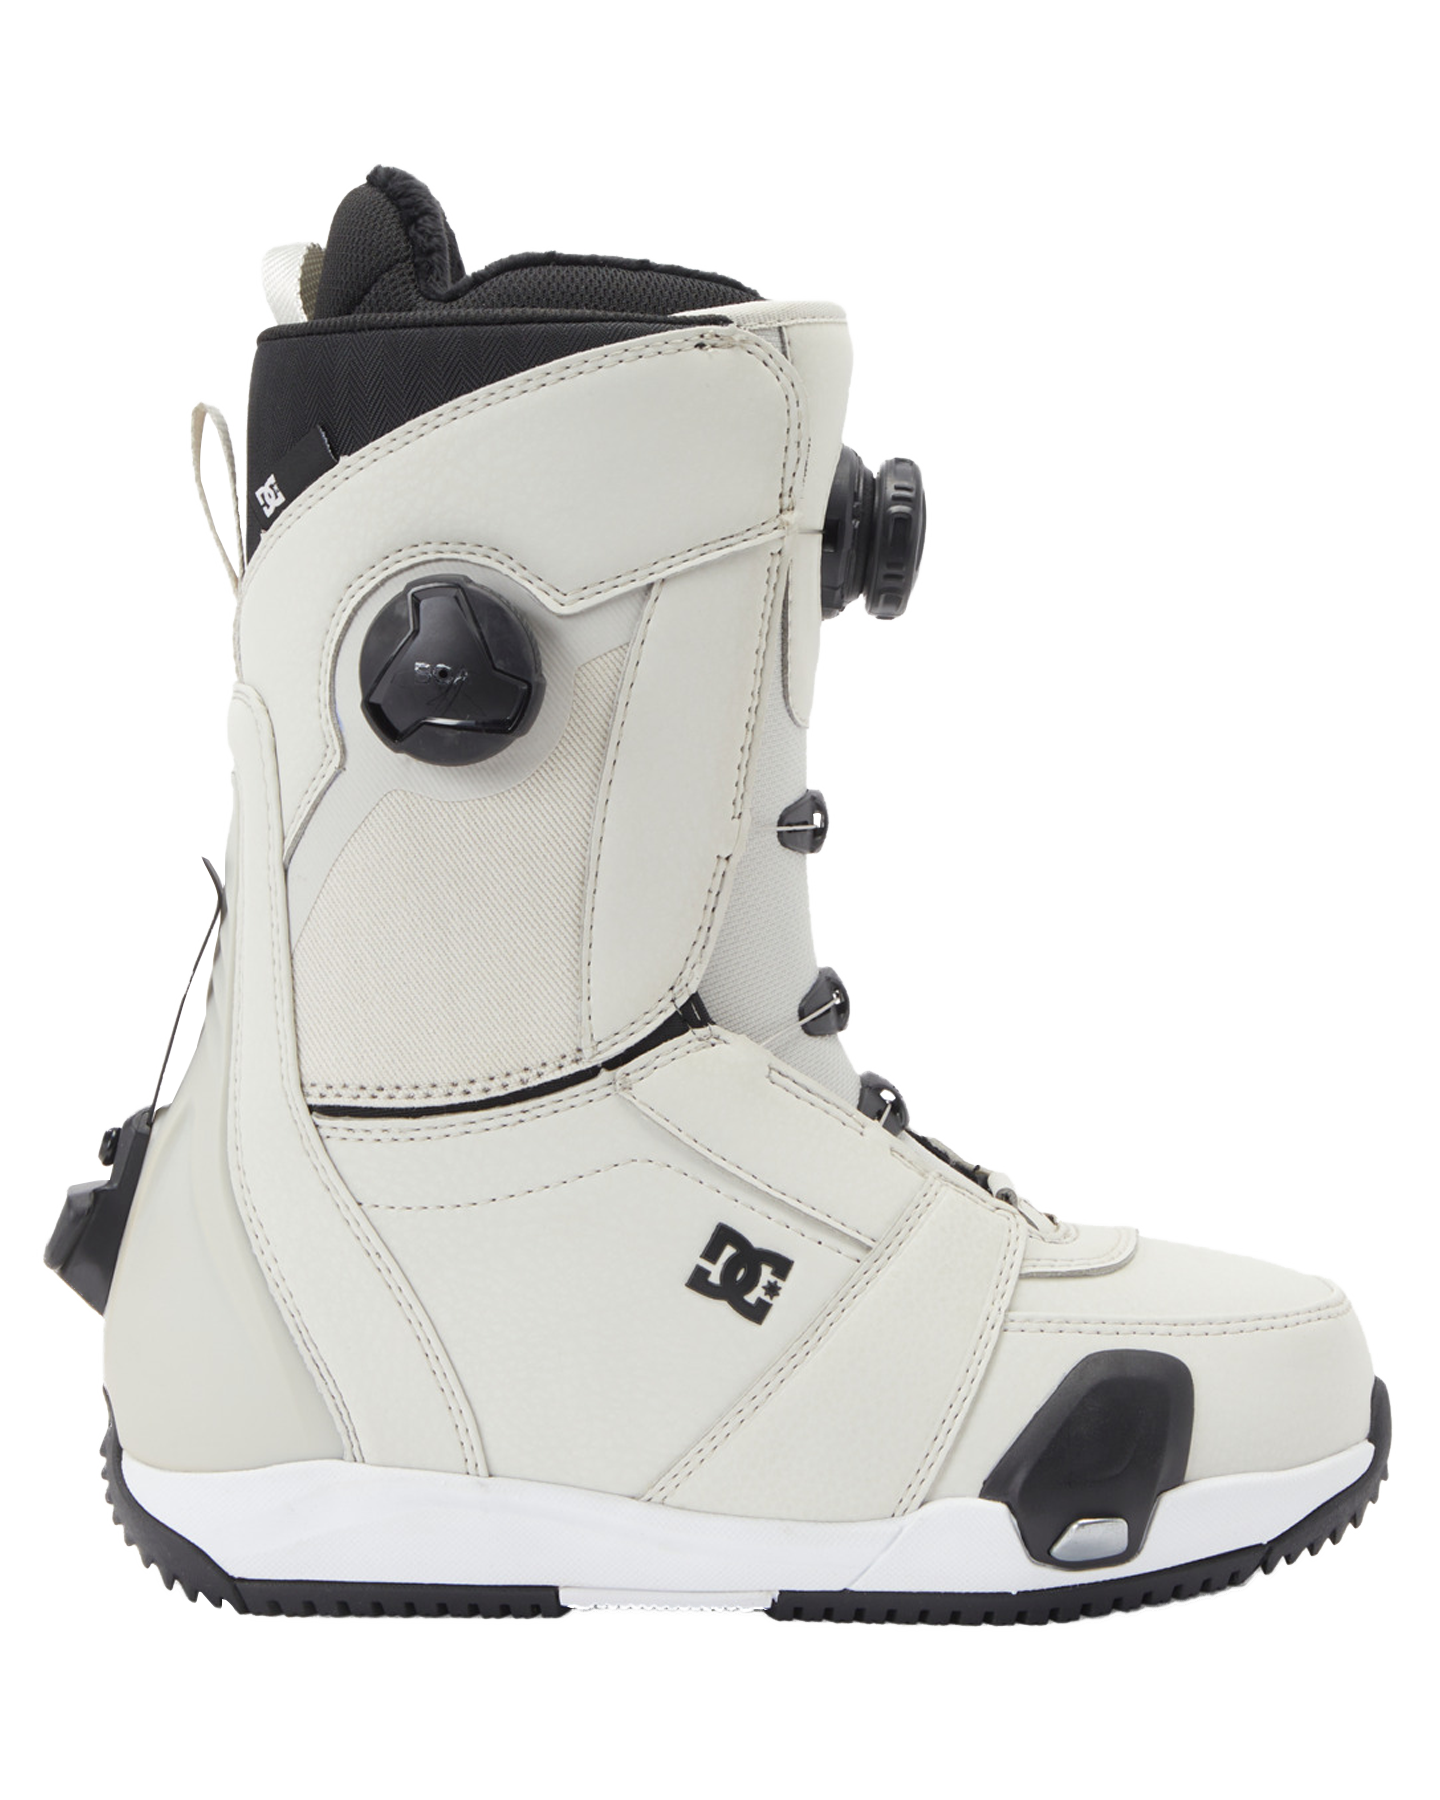 DC Women's Lotus Step On® Snowboard Boots - Silver Birch Women's Snowboard Boots - SnowSkiersWarehouse